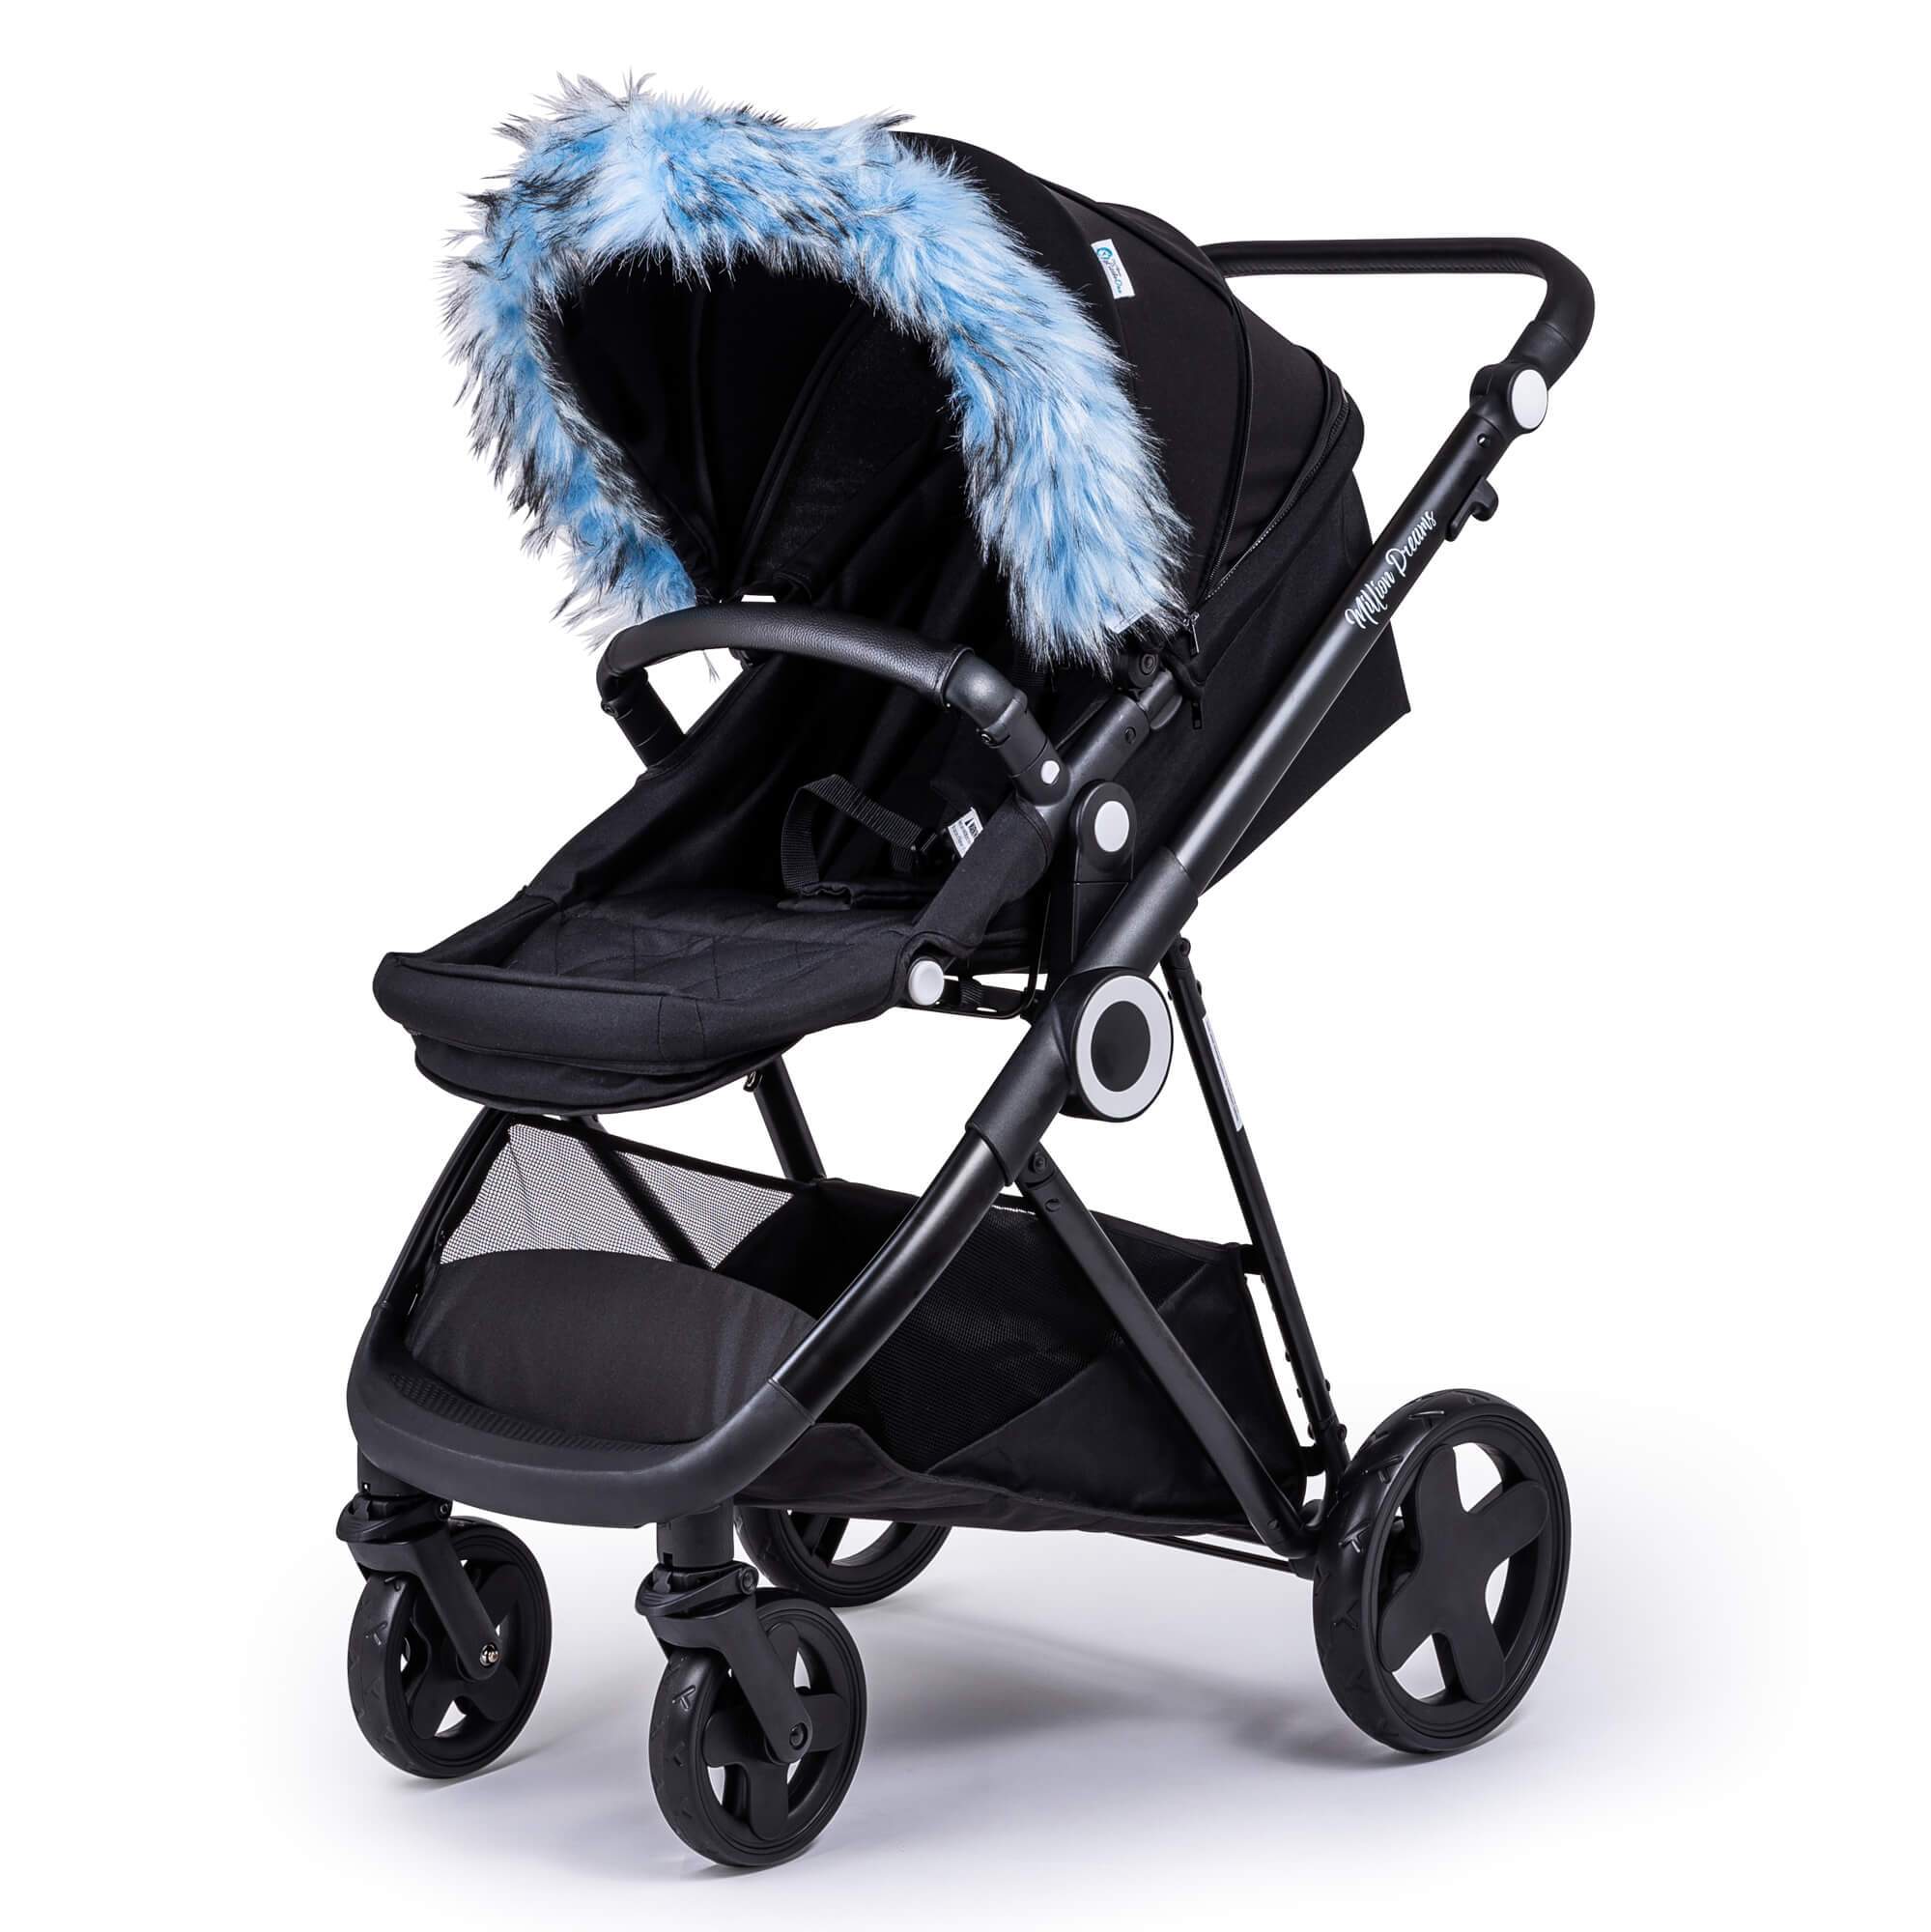 Pram Fur Hood Trim Attachment for Pushchair Compatible with Red Kite - Light Blue / Fits All Models | For Your Little One